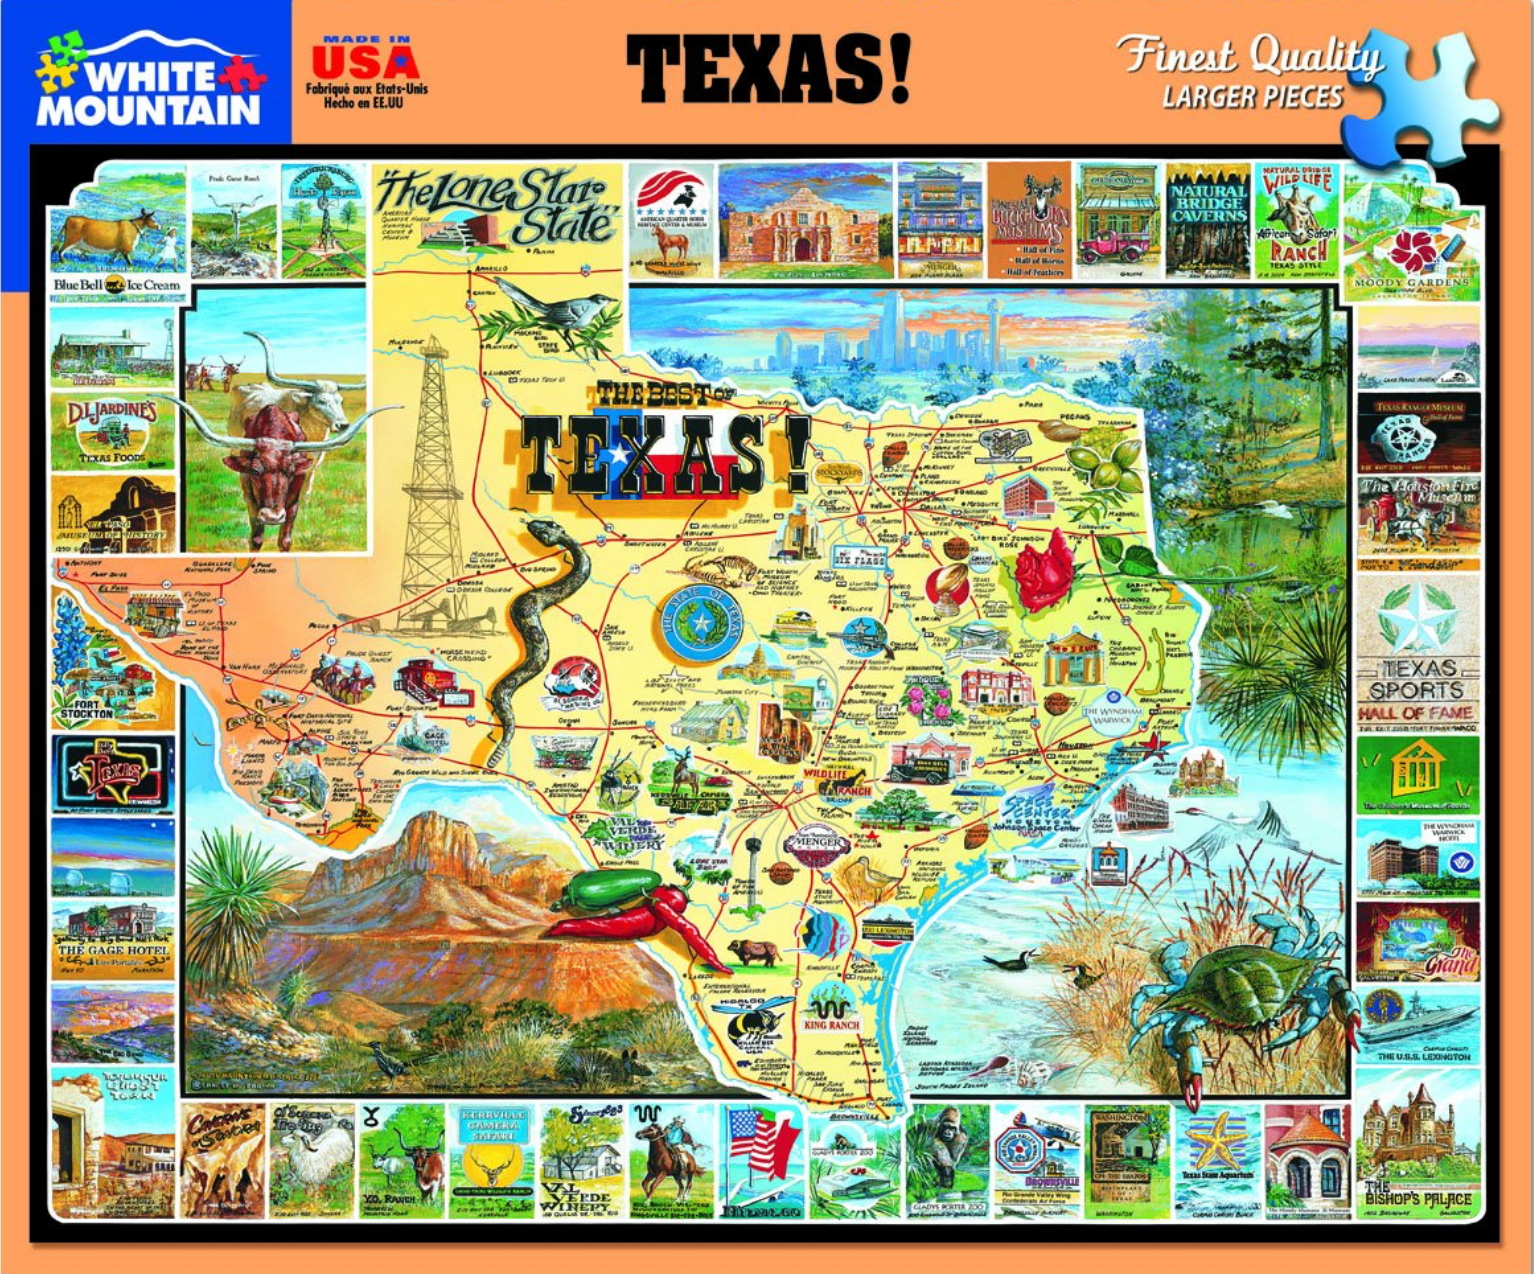 The Best of Texas (1000 pc puzzle)